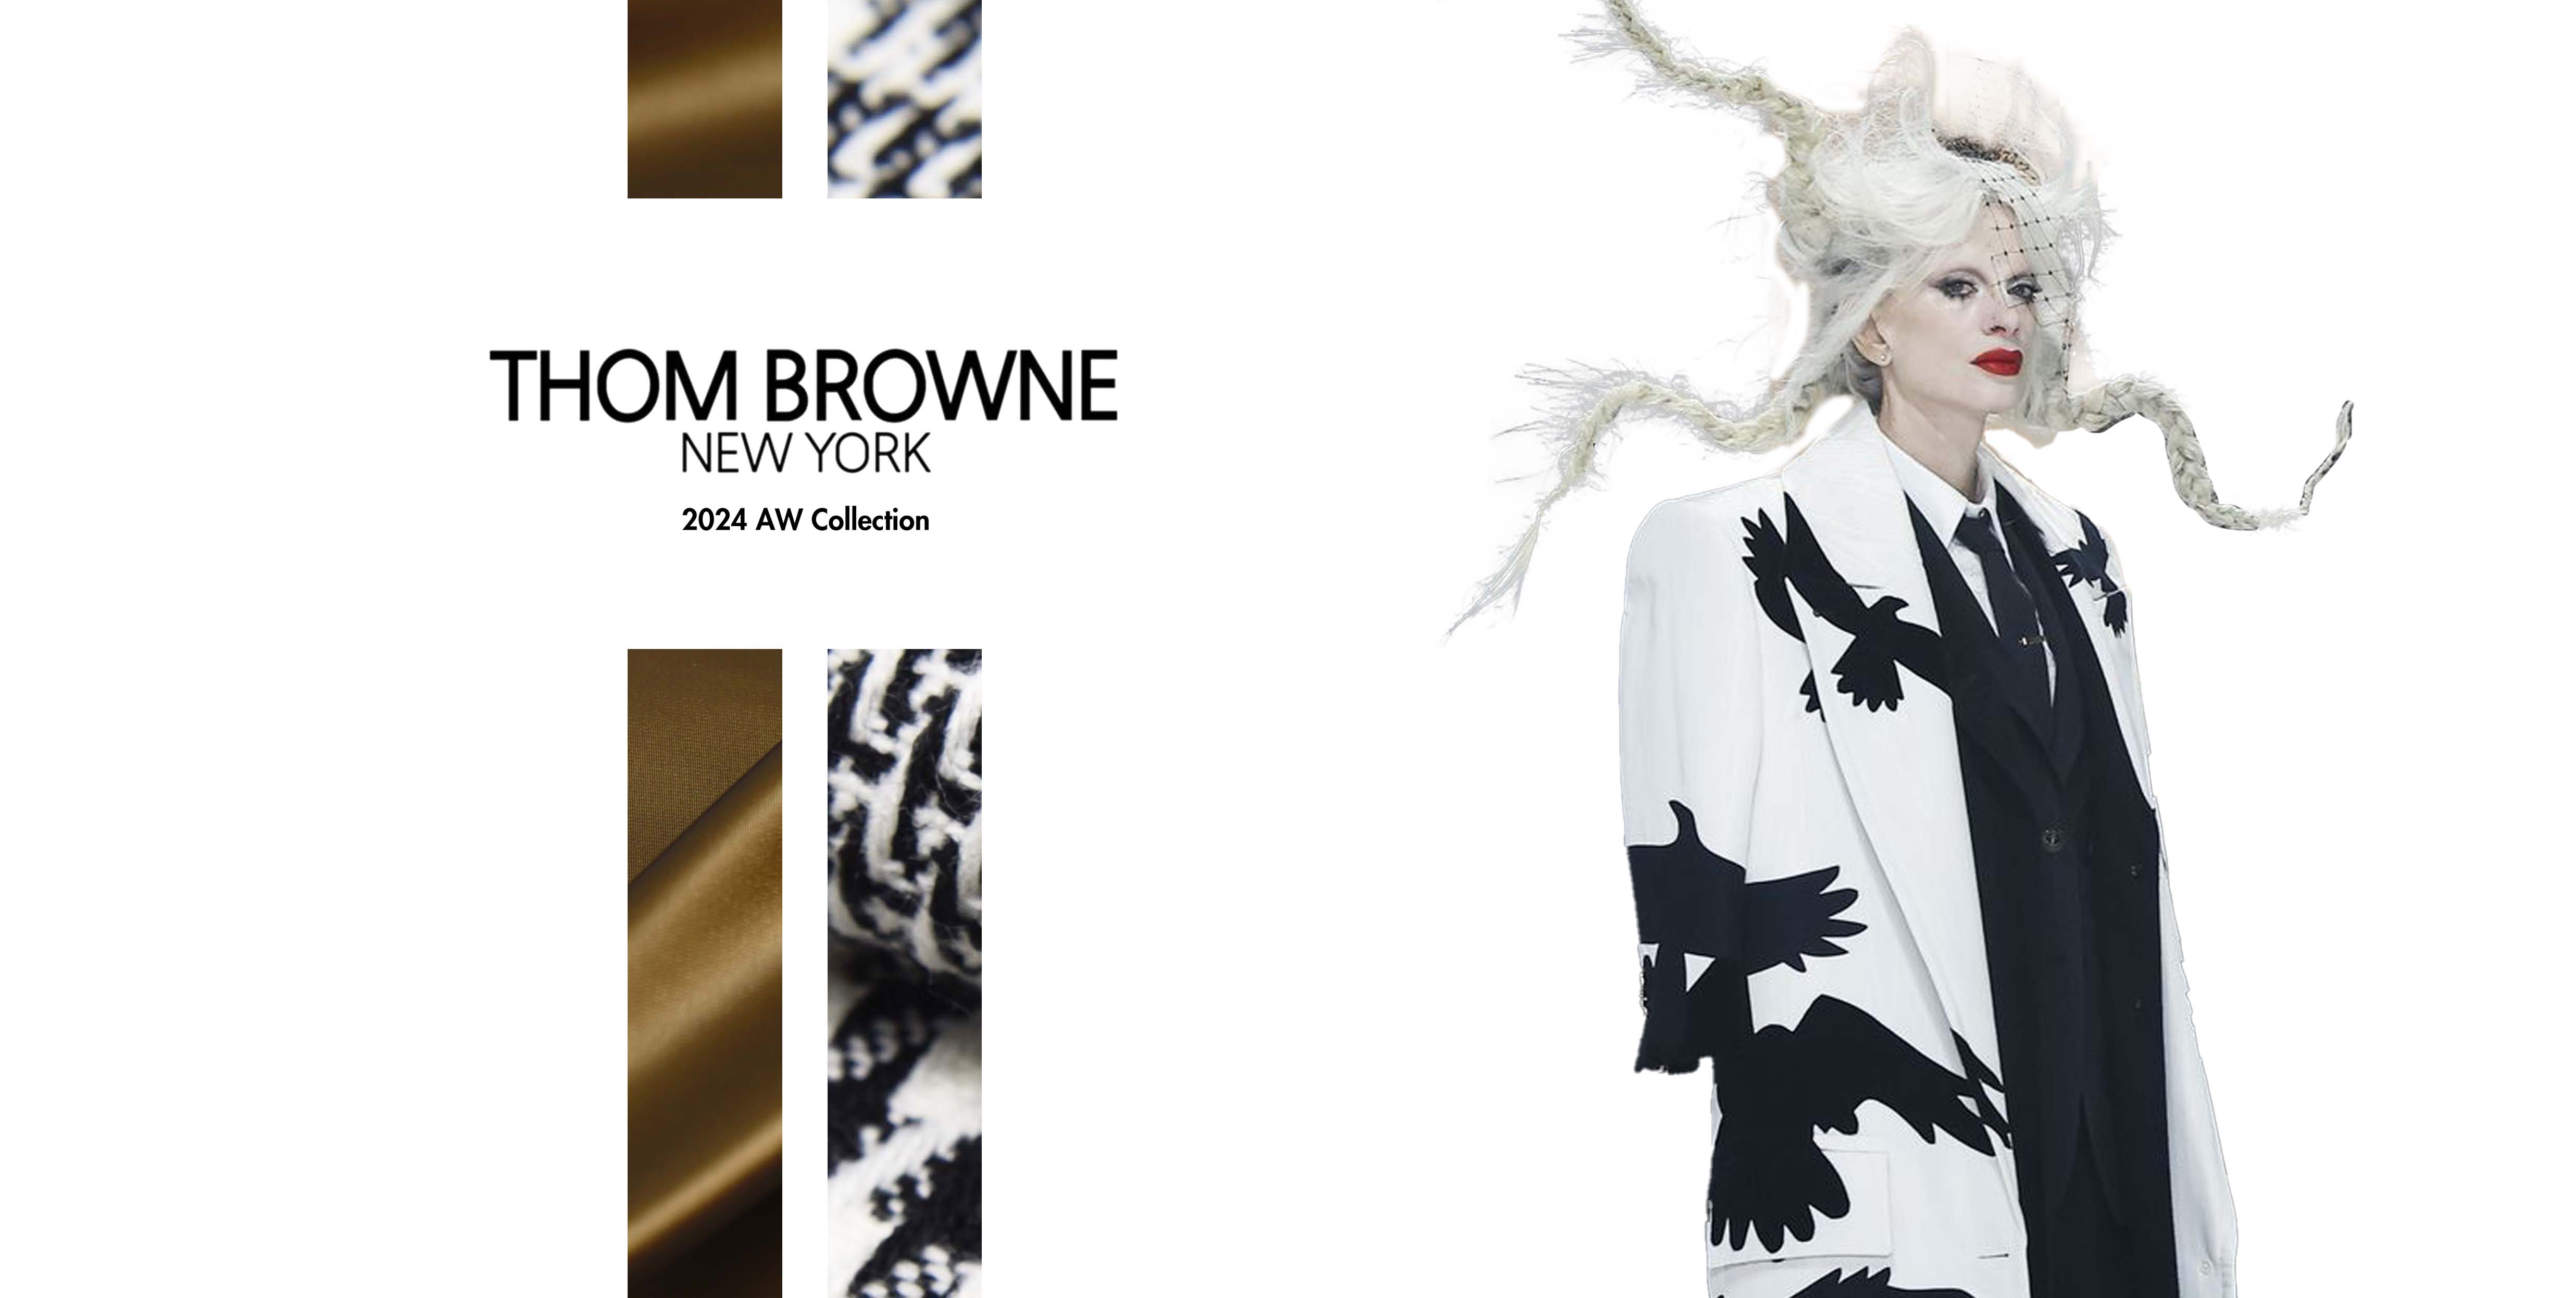 Raven’s Elegance: A Tribute to Thom Browne’s Fall/Winter 2024 Showcase